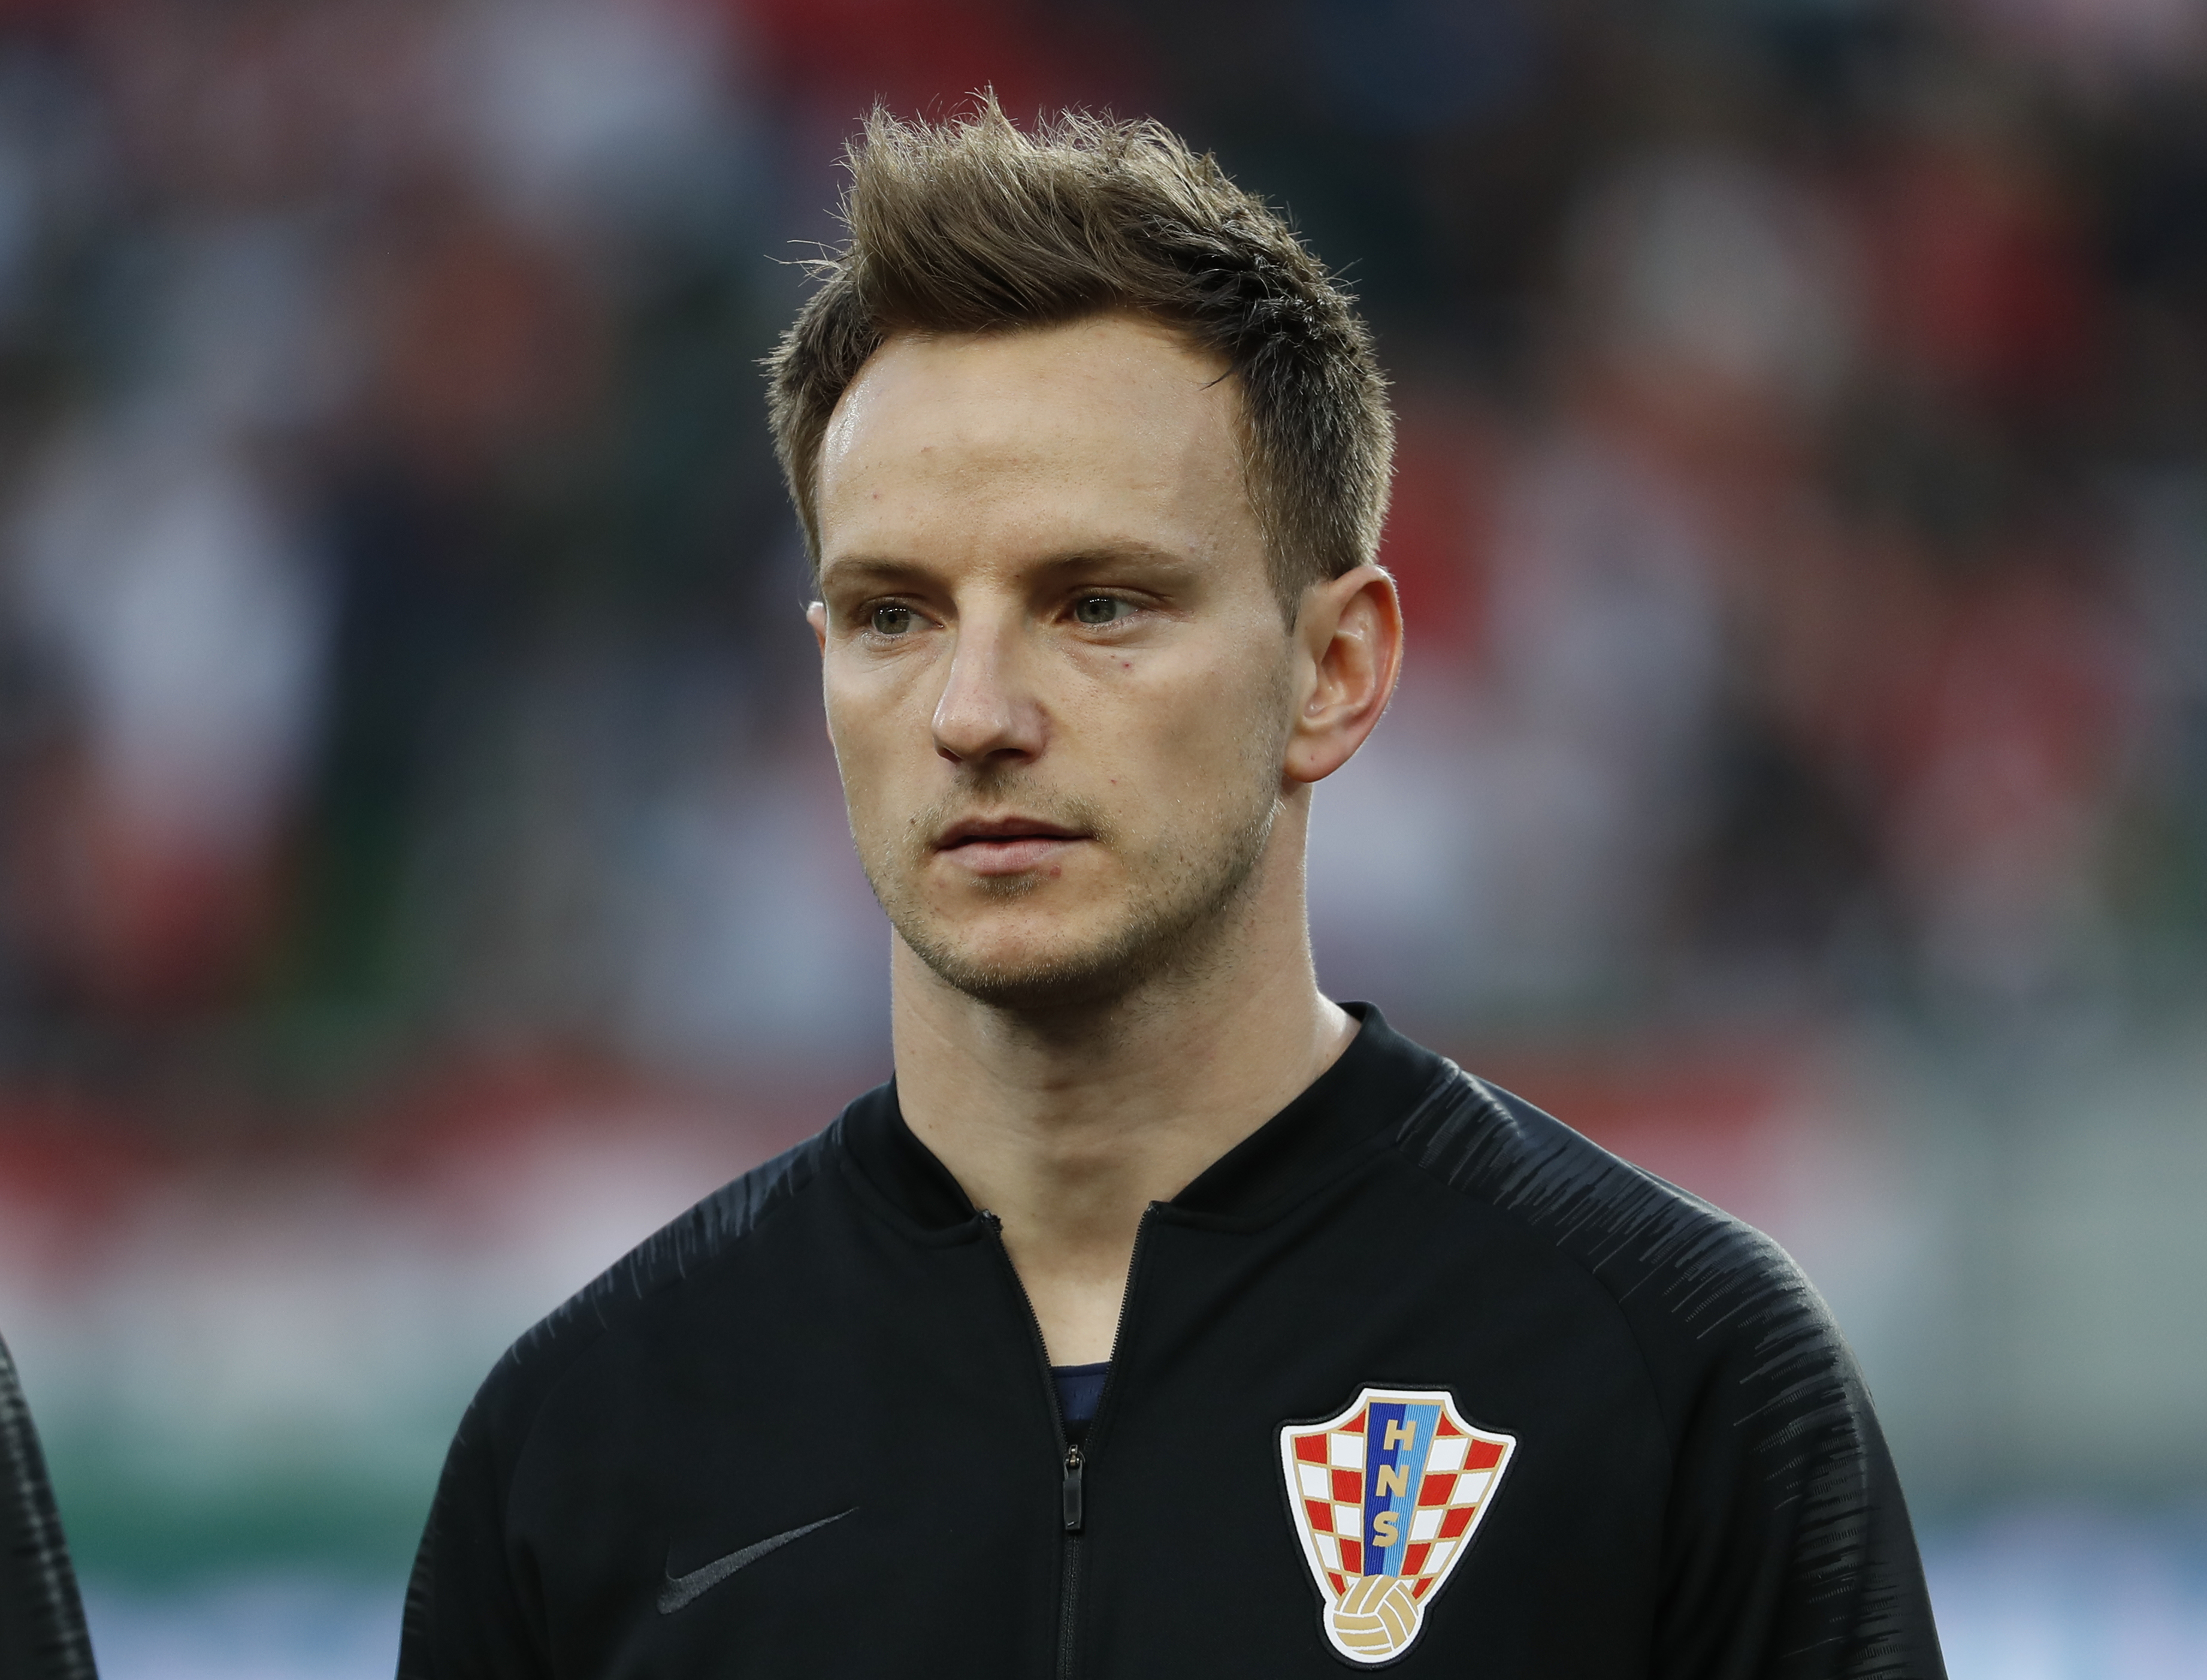 BUDAPEST, HUNGARY - MARCH 24: Ivan Rakitic of Croatia  listens to the anthem prior to the 2020 UEFA European Championships group E qualifying match between Hungary and Croatia at Groupama Arena on March 24, 2019 in Budapest, Hungary. (Photo by Laszlo Szirtesi/Getty Images)